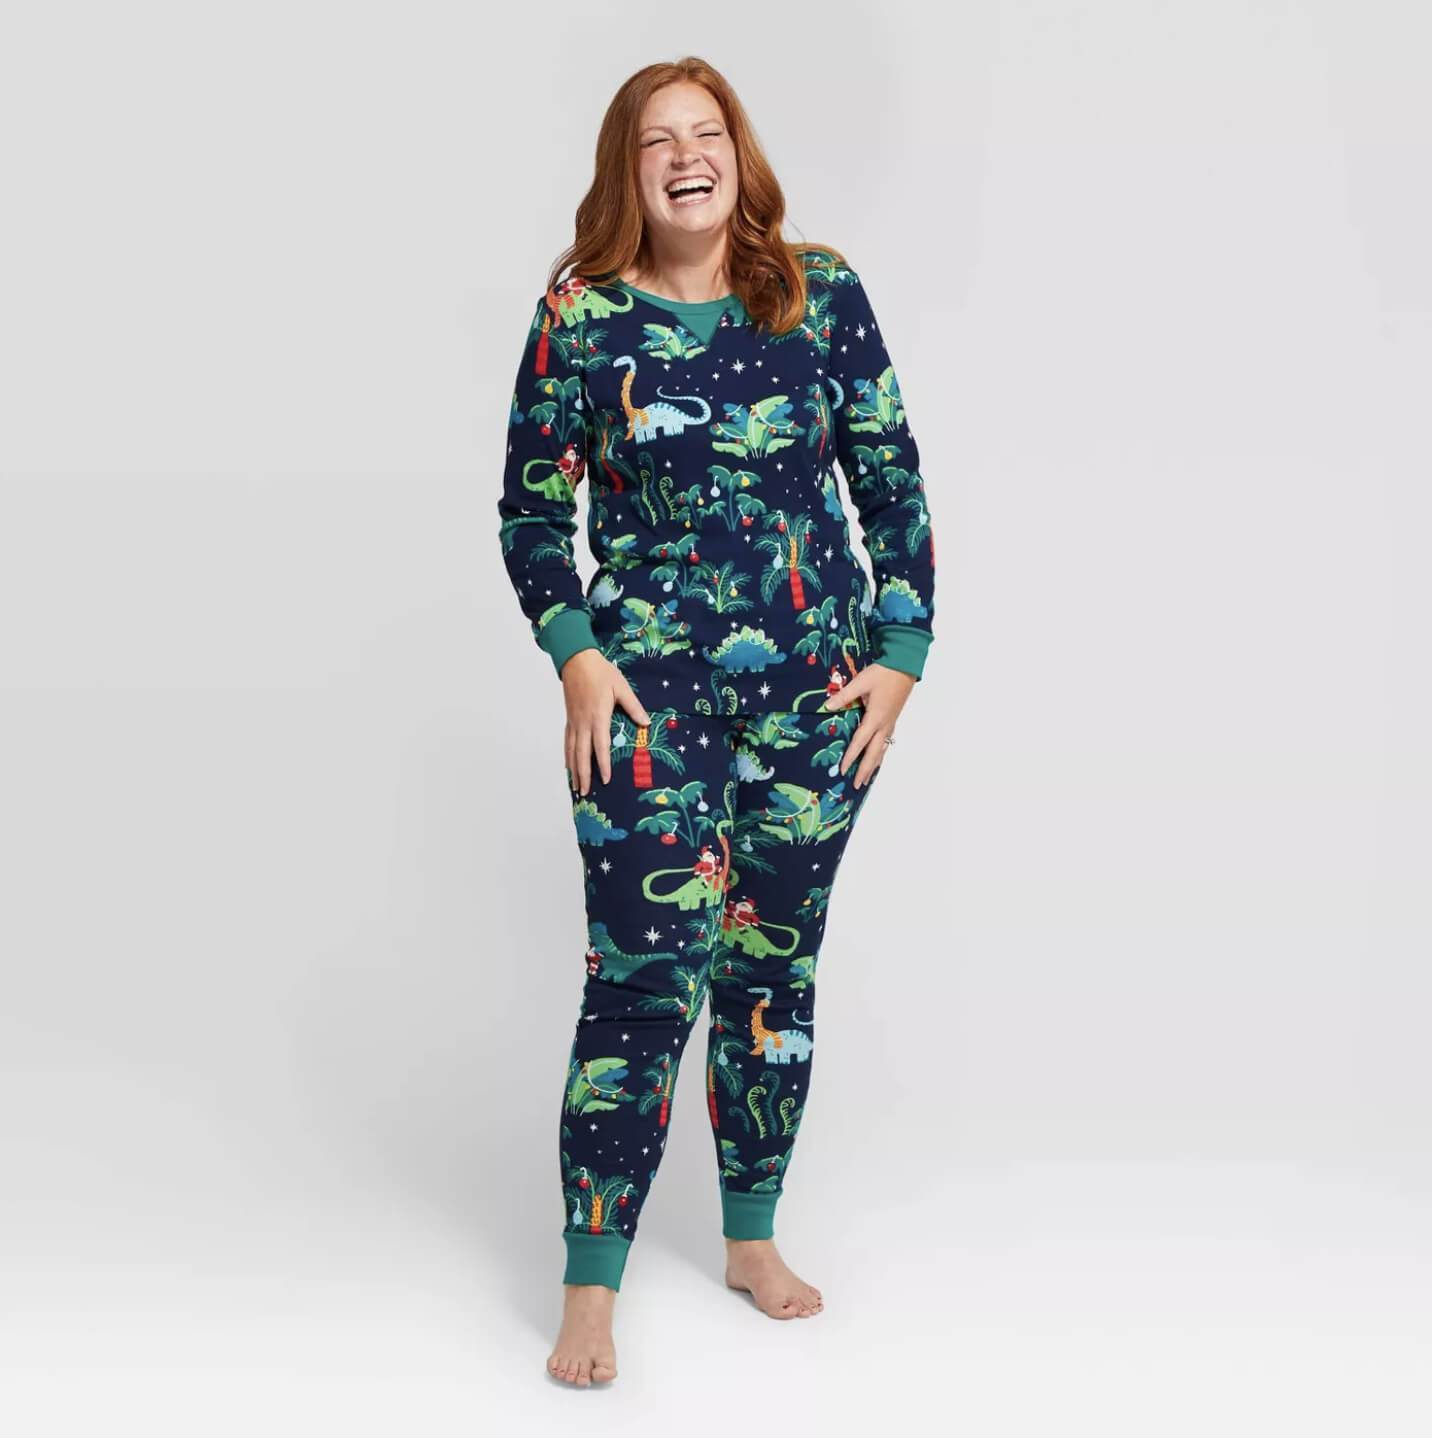 Christmas Dinosaur Patterned Family Matching Pajamas Sets (with Pet Dog Clothes)